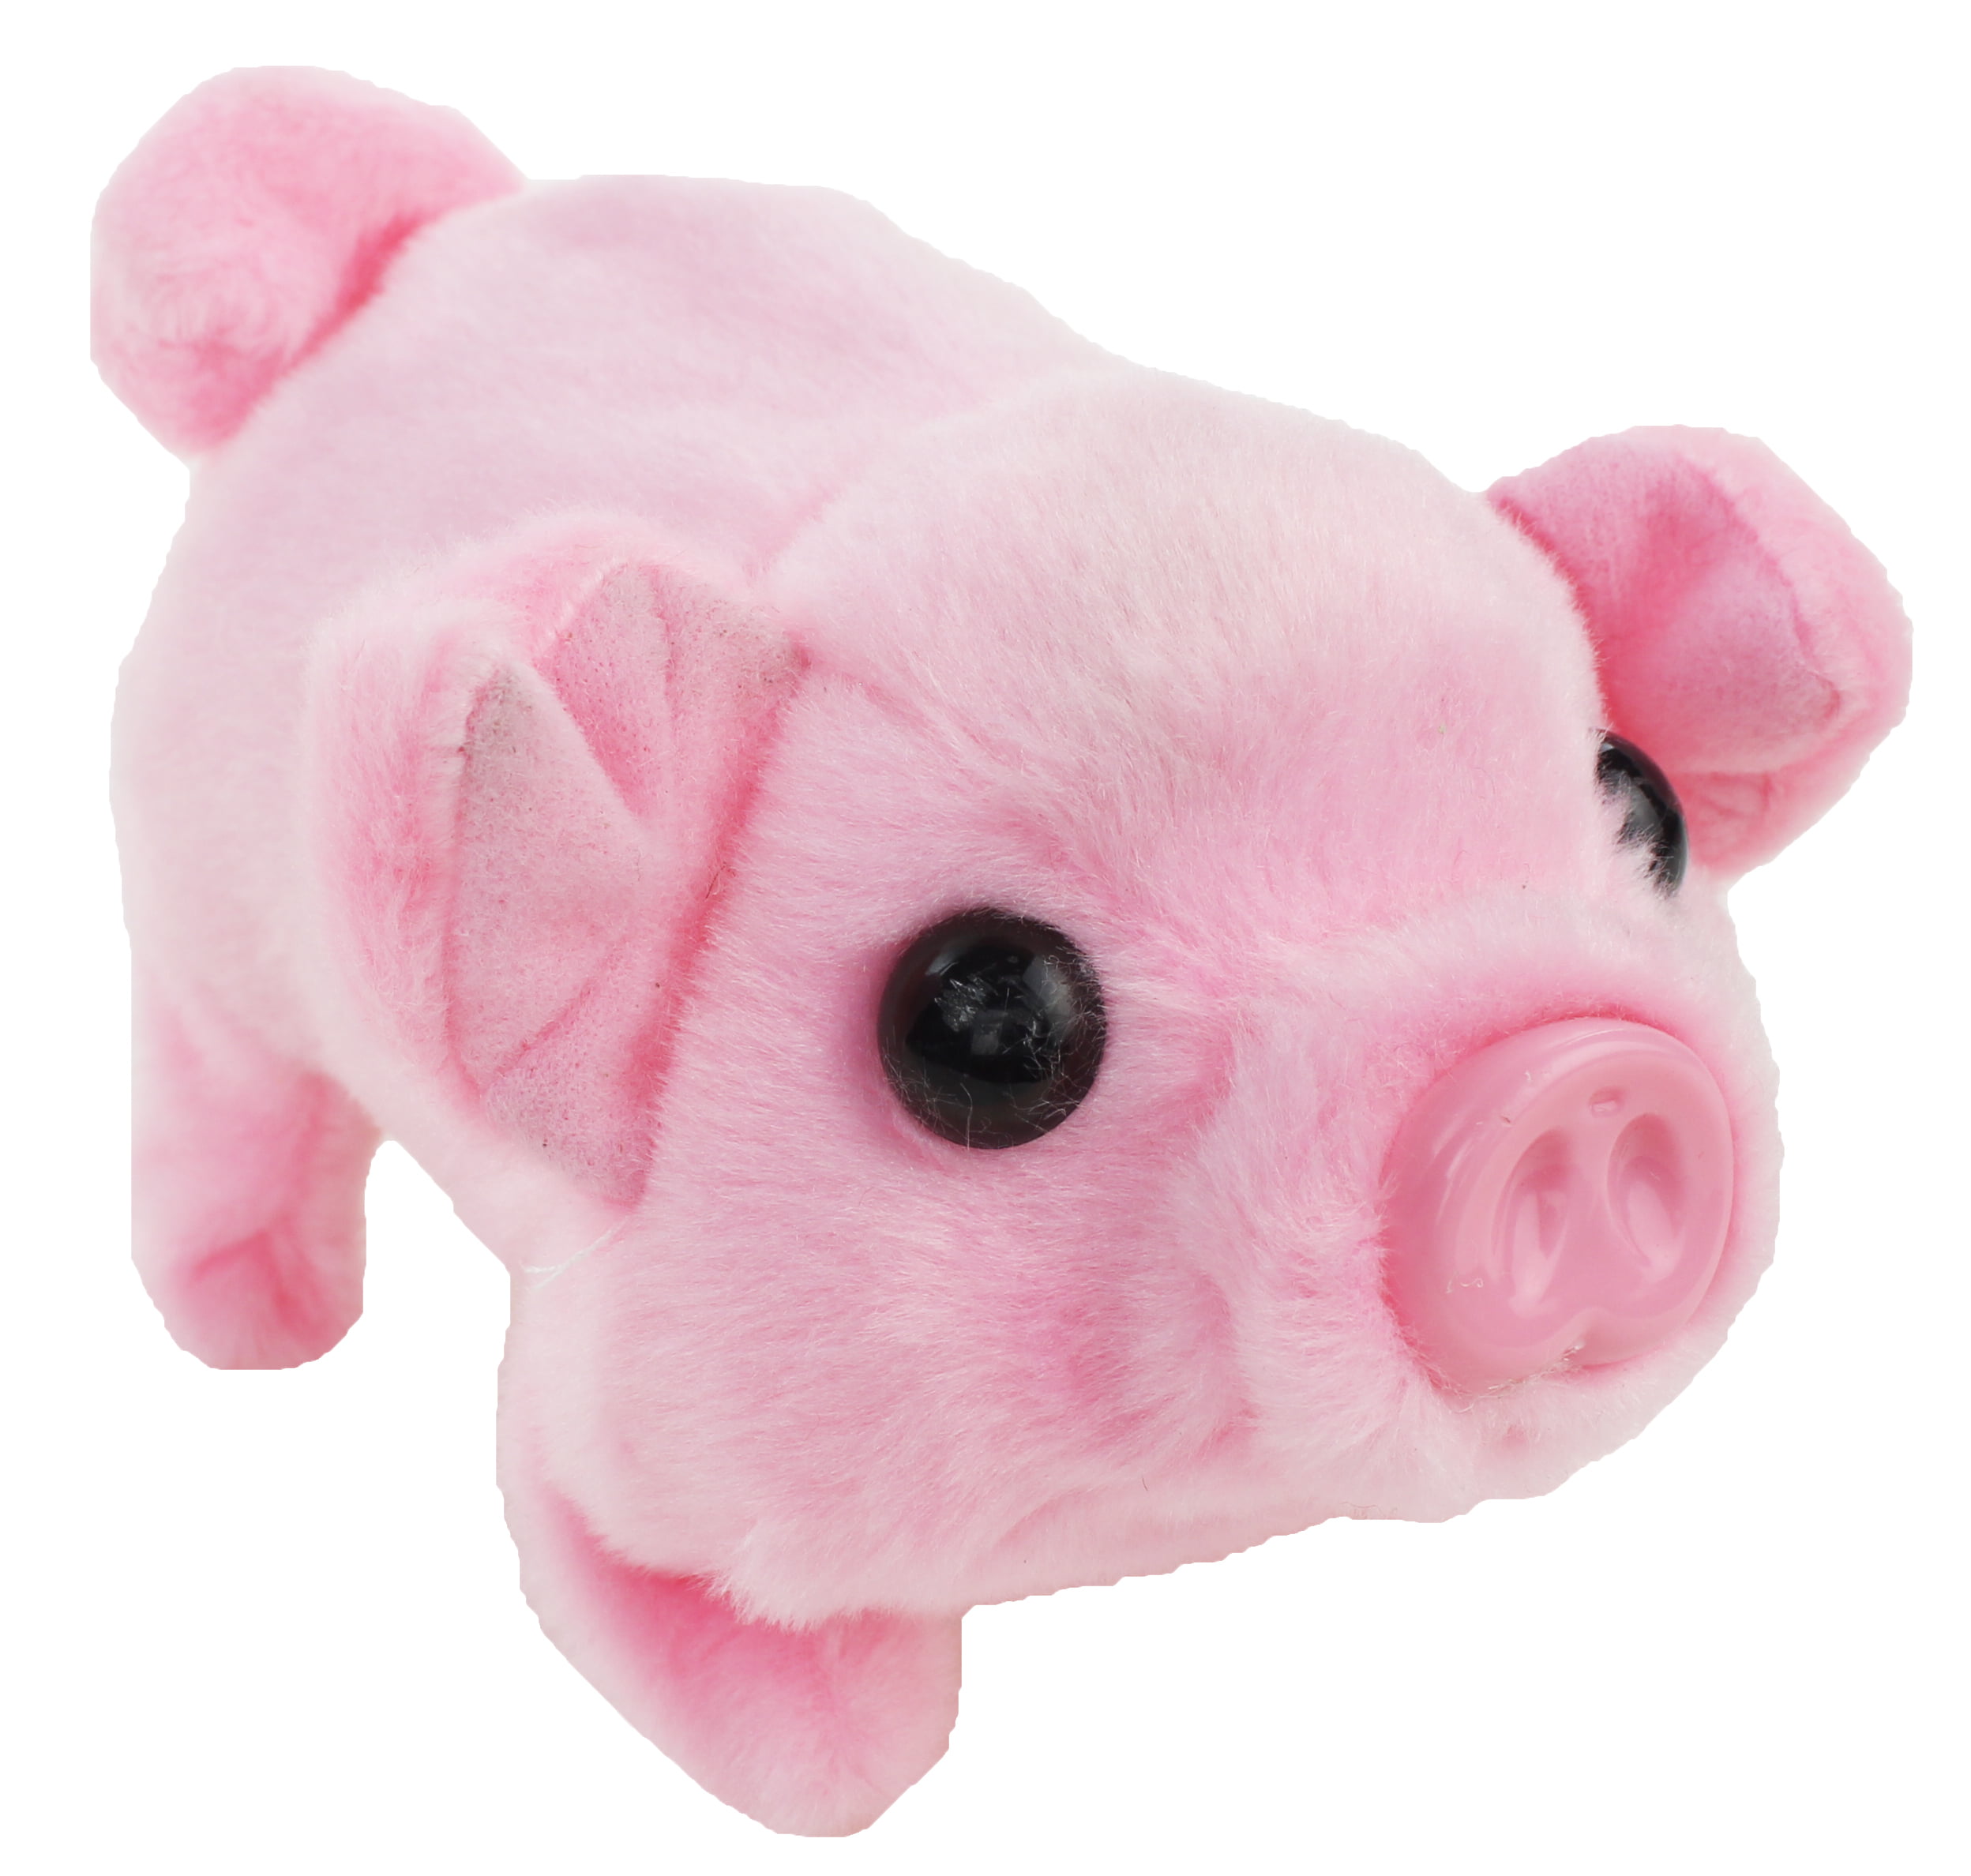 PINK COLOR BATTERY OPER WALKING & OINKING PIG novelty toy pet piggy wagging tail